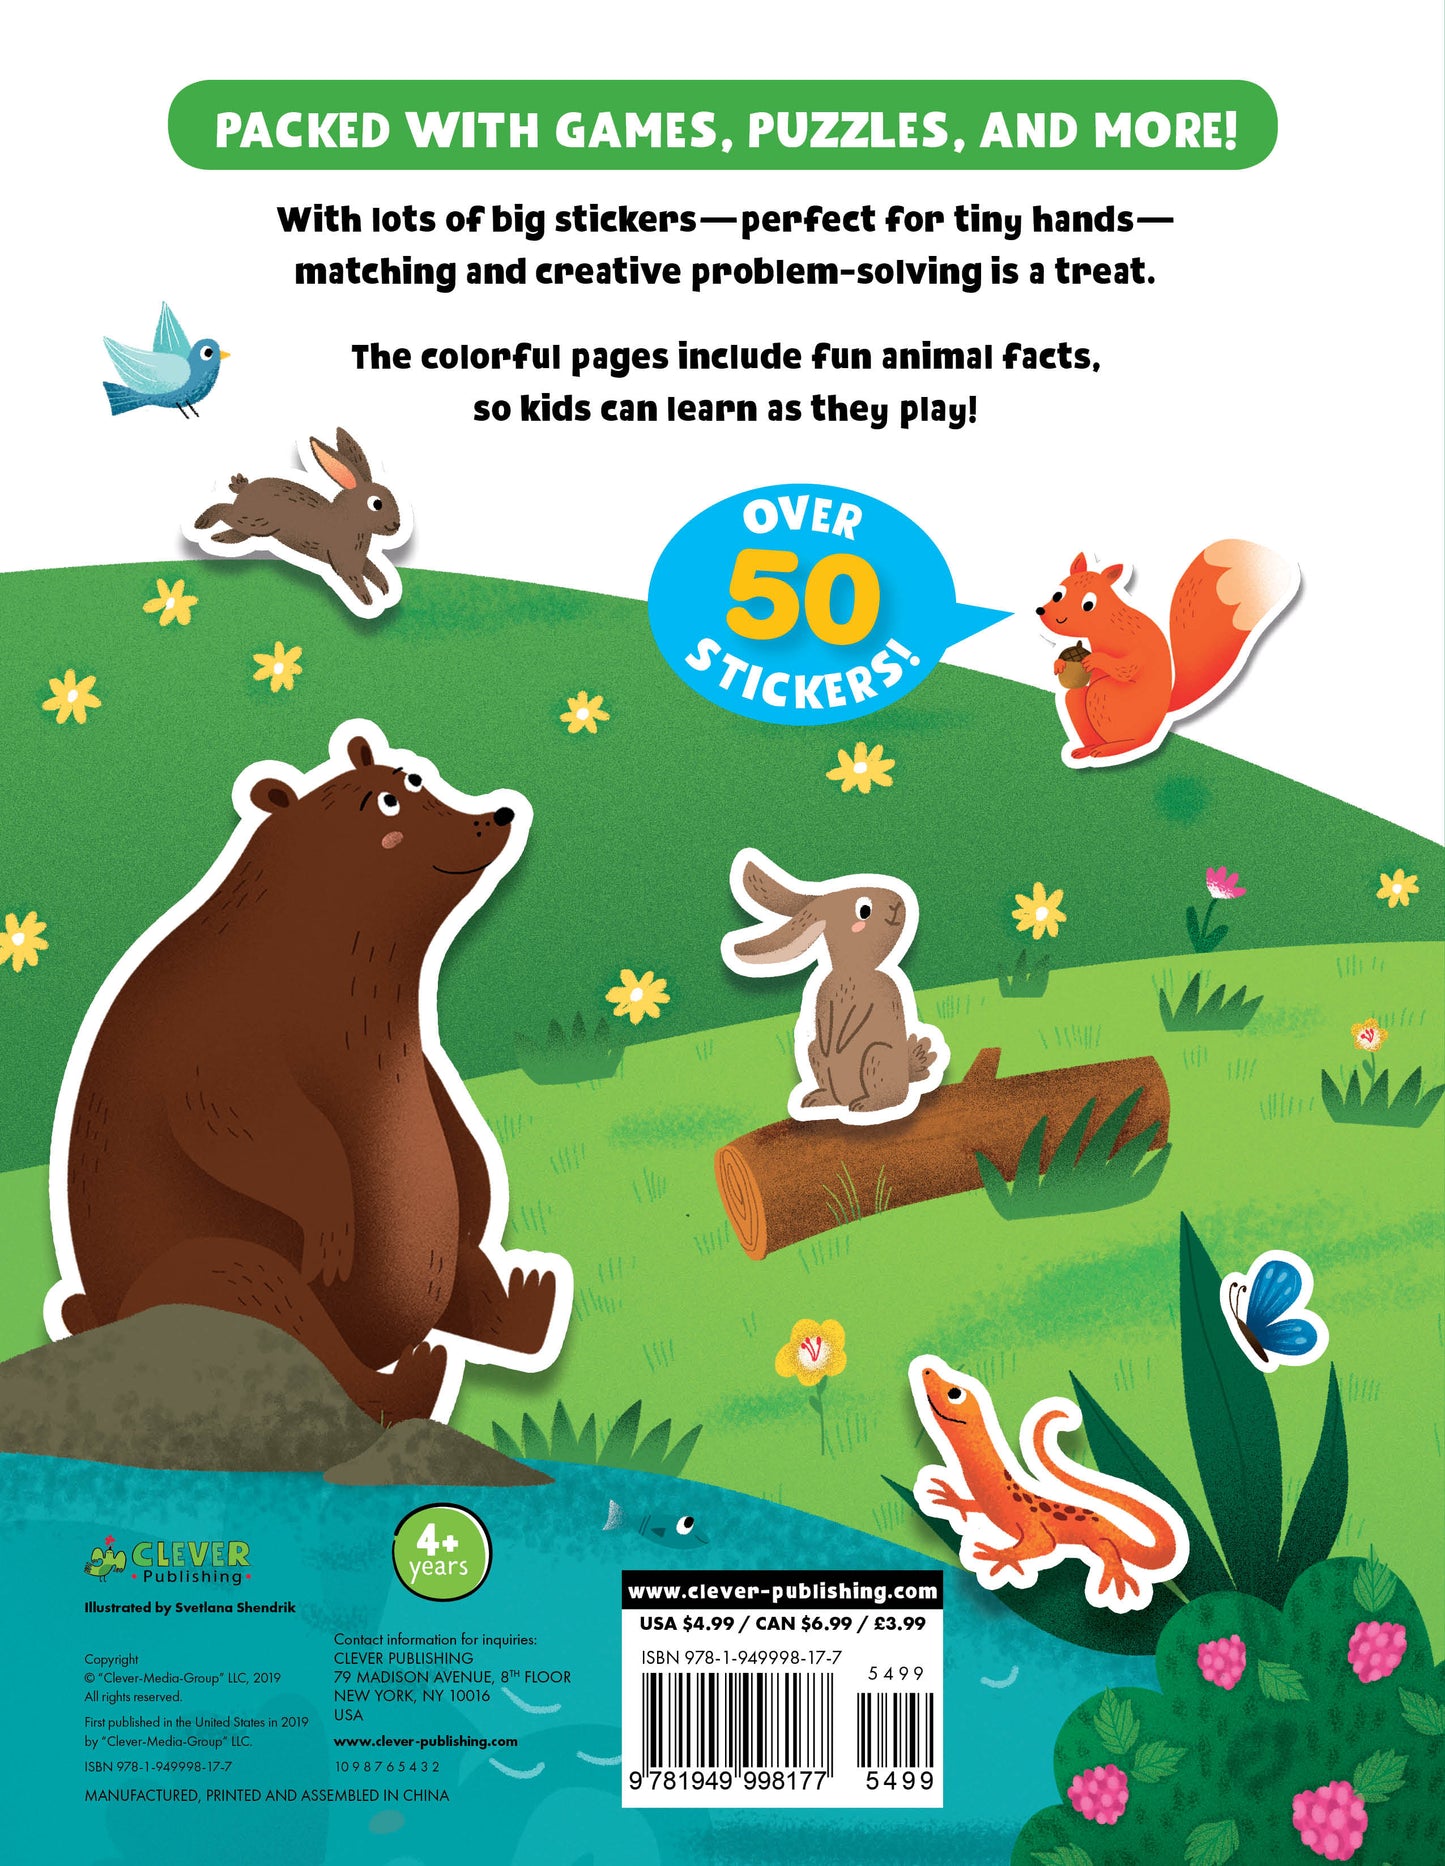 Animals Stickers and Activity Book